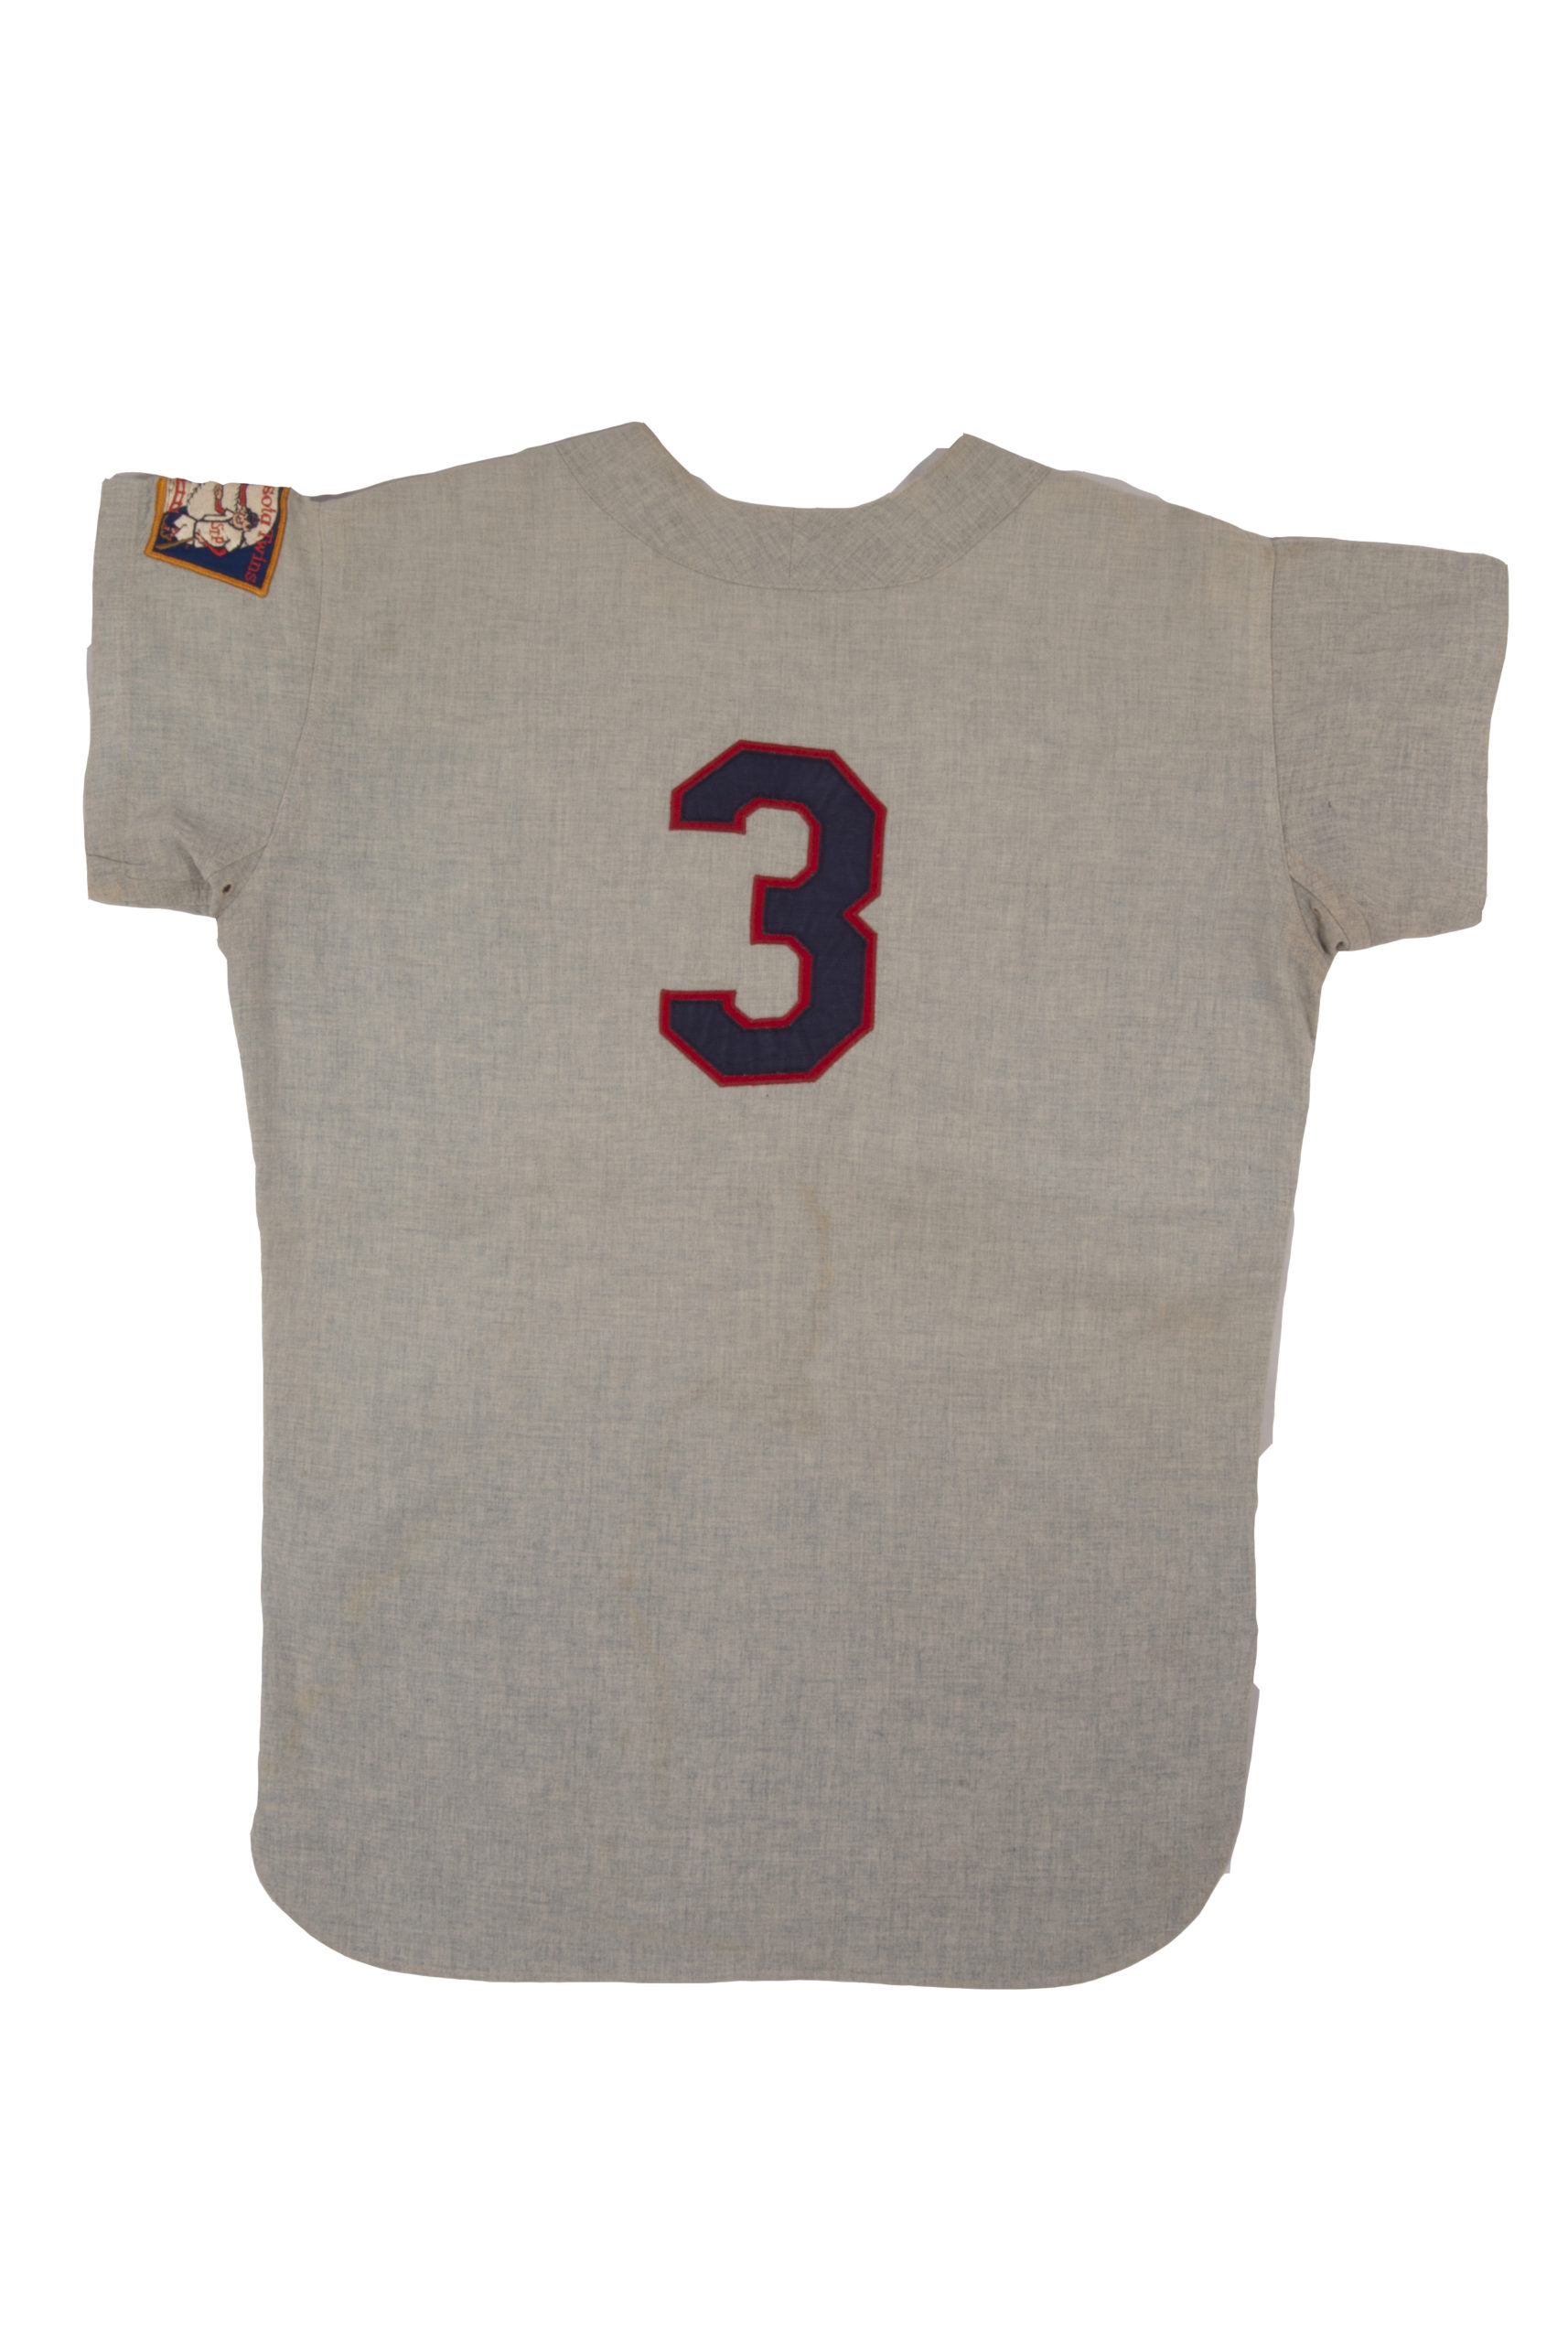 Harmon Killebrew 1967 Minnesota Twins Game Used Flannel Jersey Photomatched  to the October 1st - PSA/DNA, MEARS, Resolution Photomatching - SOLD - SCP  AUCTIONS